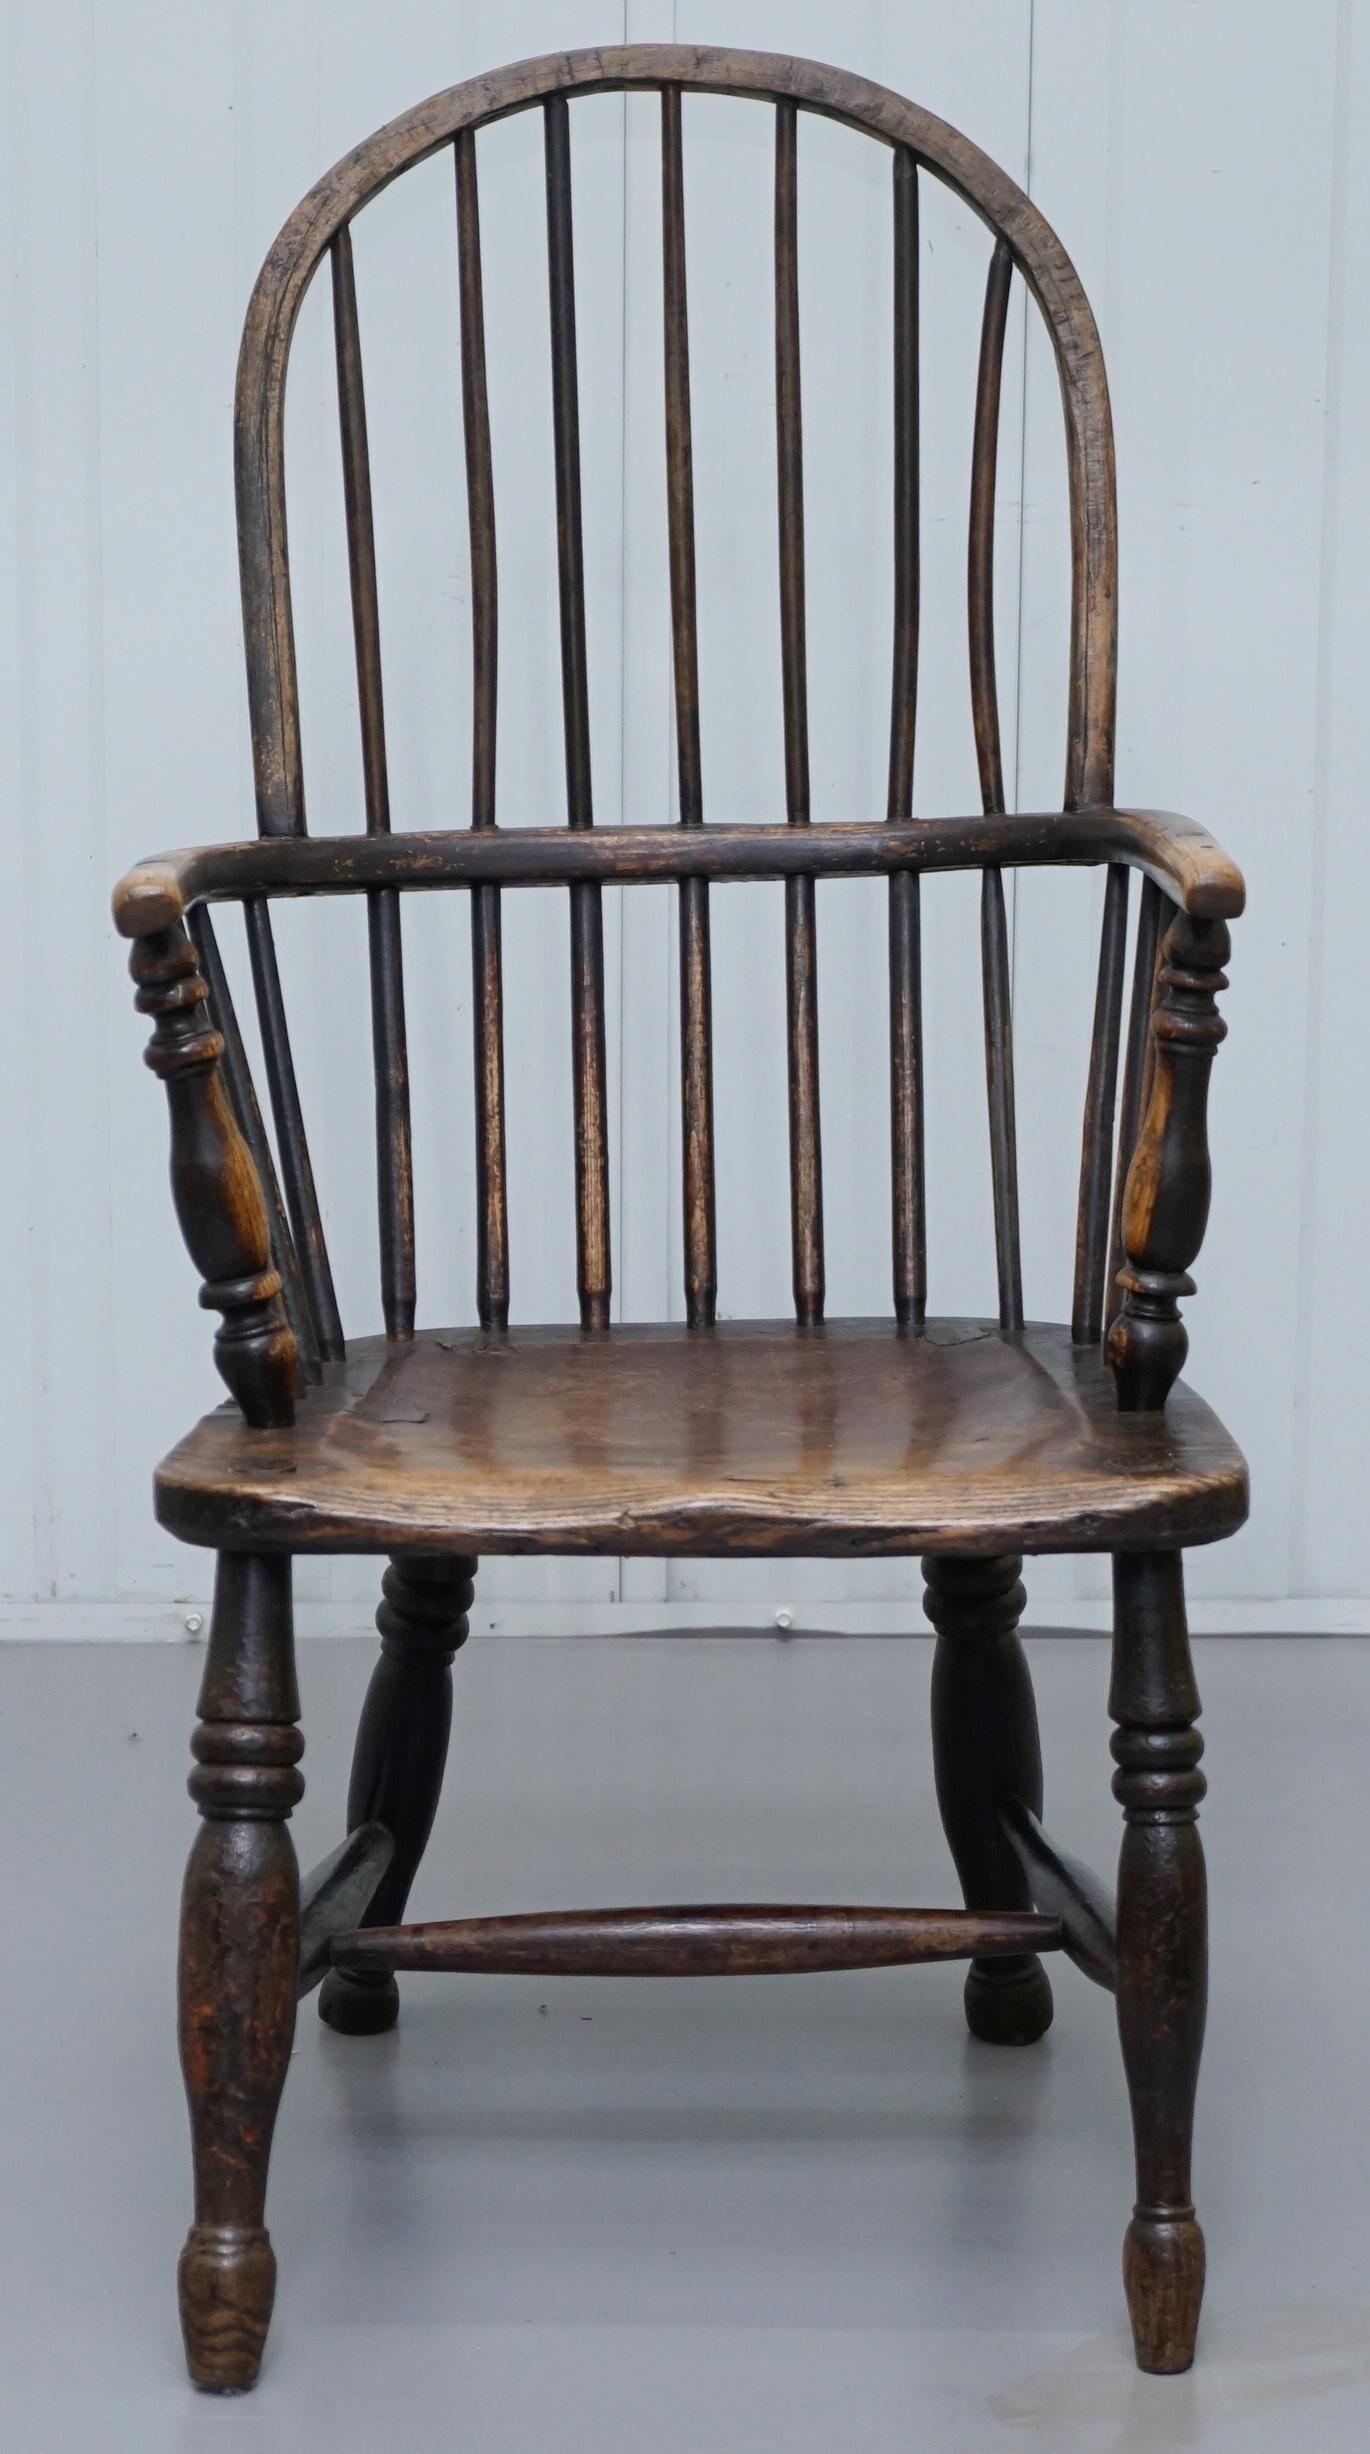 We are delighted to this stunning early 19th century elm hoop back west country Windsor armchair with traces of original paint

I have two other pairs of these chairs listed under my other items which are smaller

A highly coveted, well made and